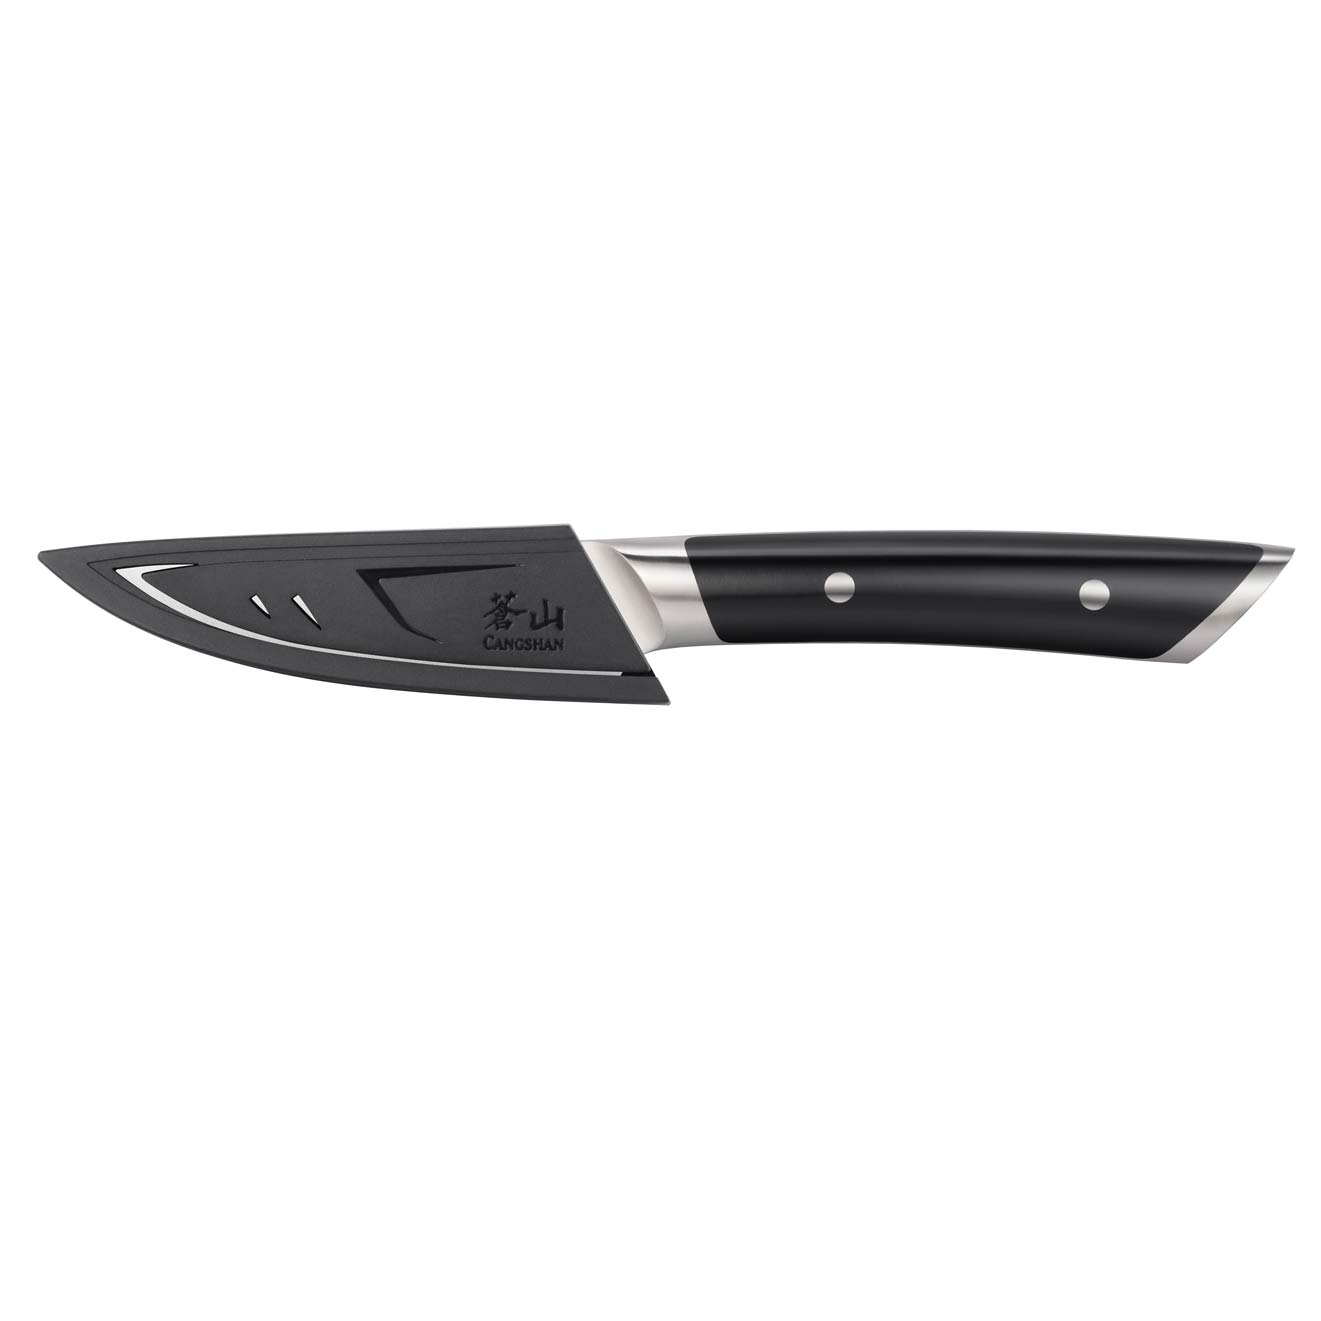 Cangshan Helena 3.5 in Paring Knife Black Kitchen Knives 12042324